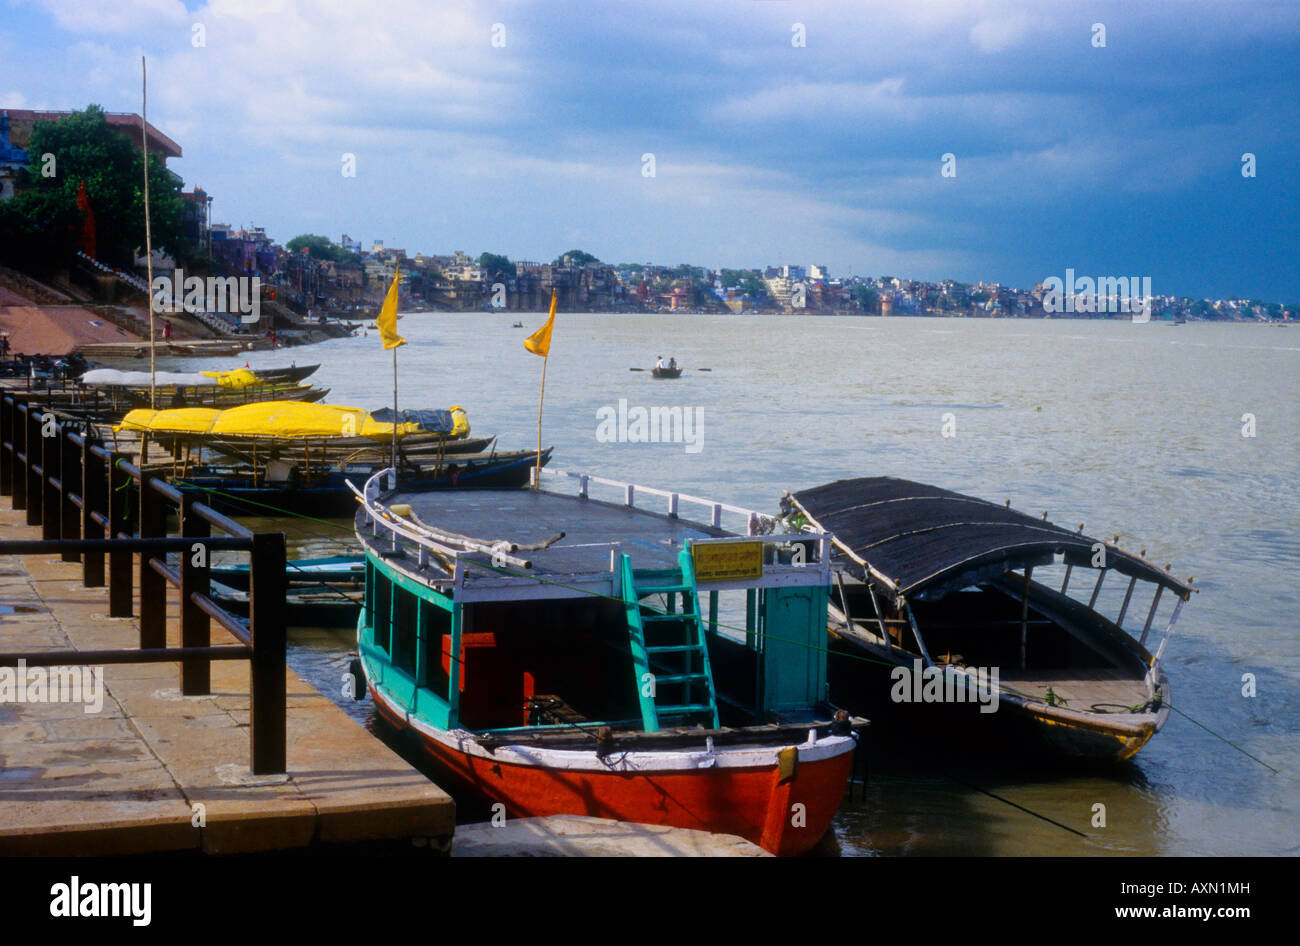 Boats on the edge of the river Ganges in Varanasi, India Stock Photo